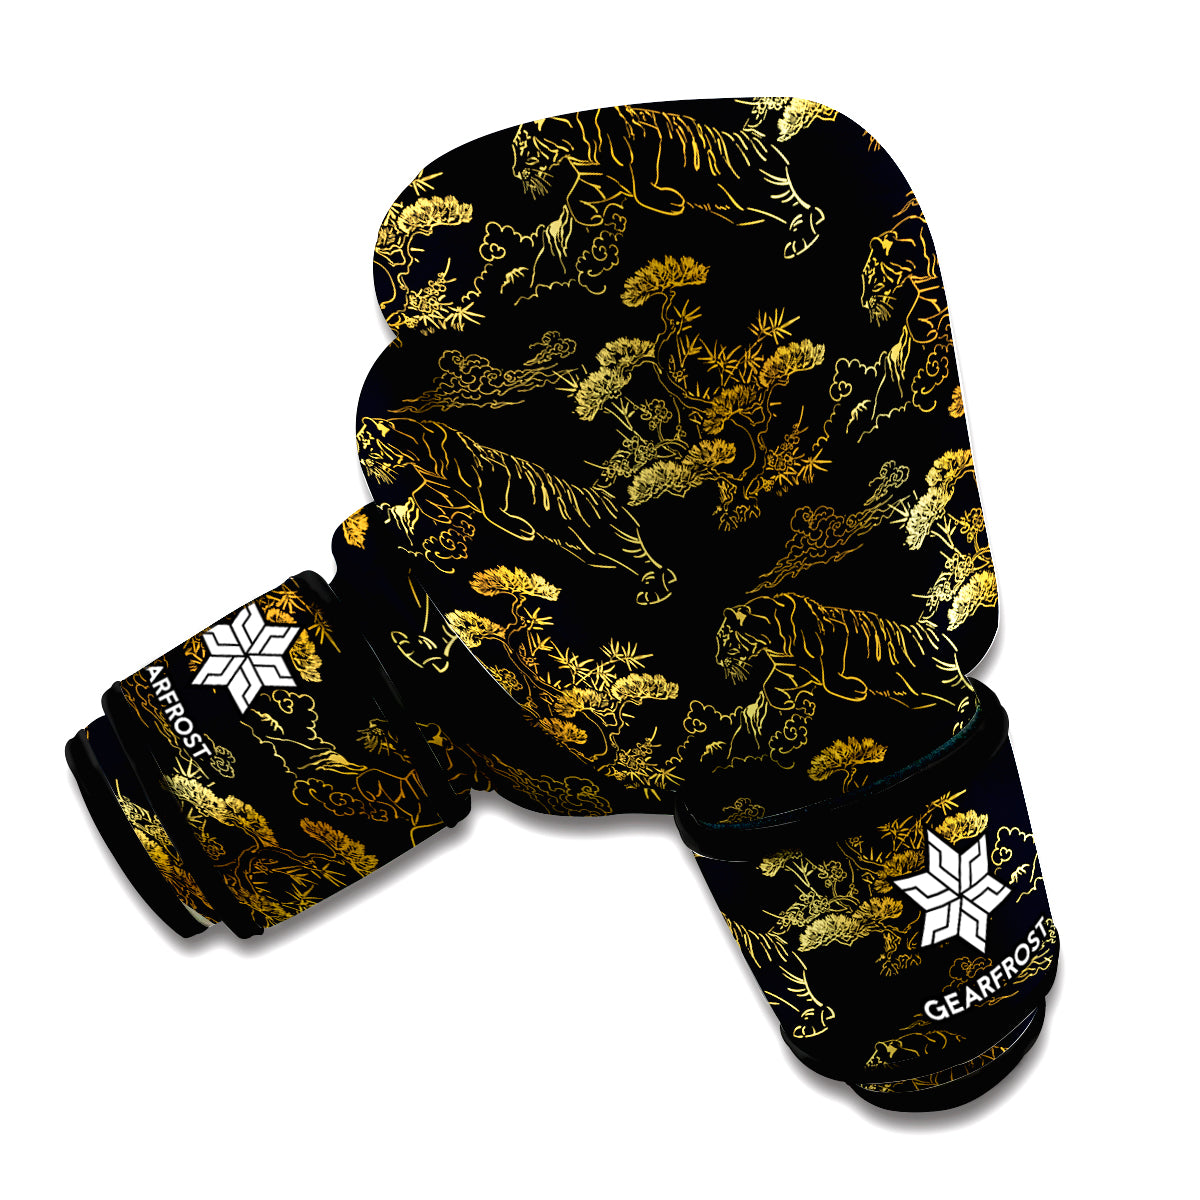 Black And Gold Japanese Tiger Print Boxing Gloves